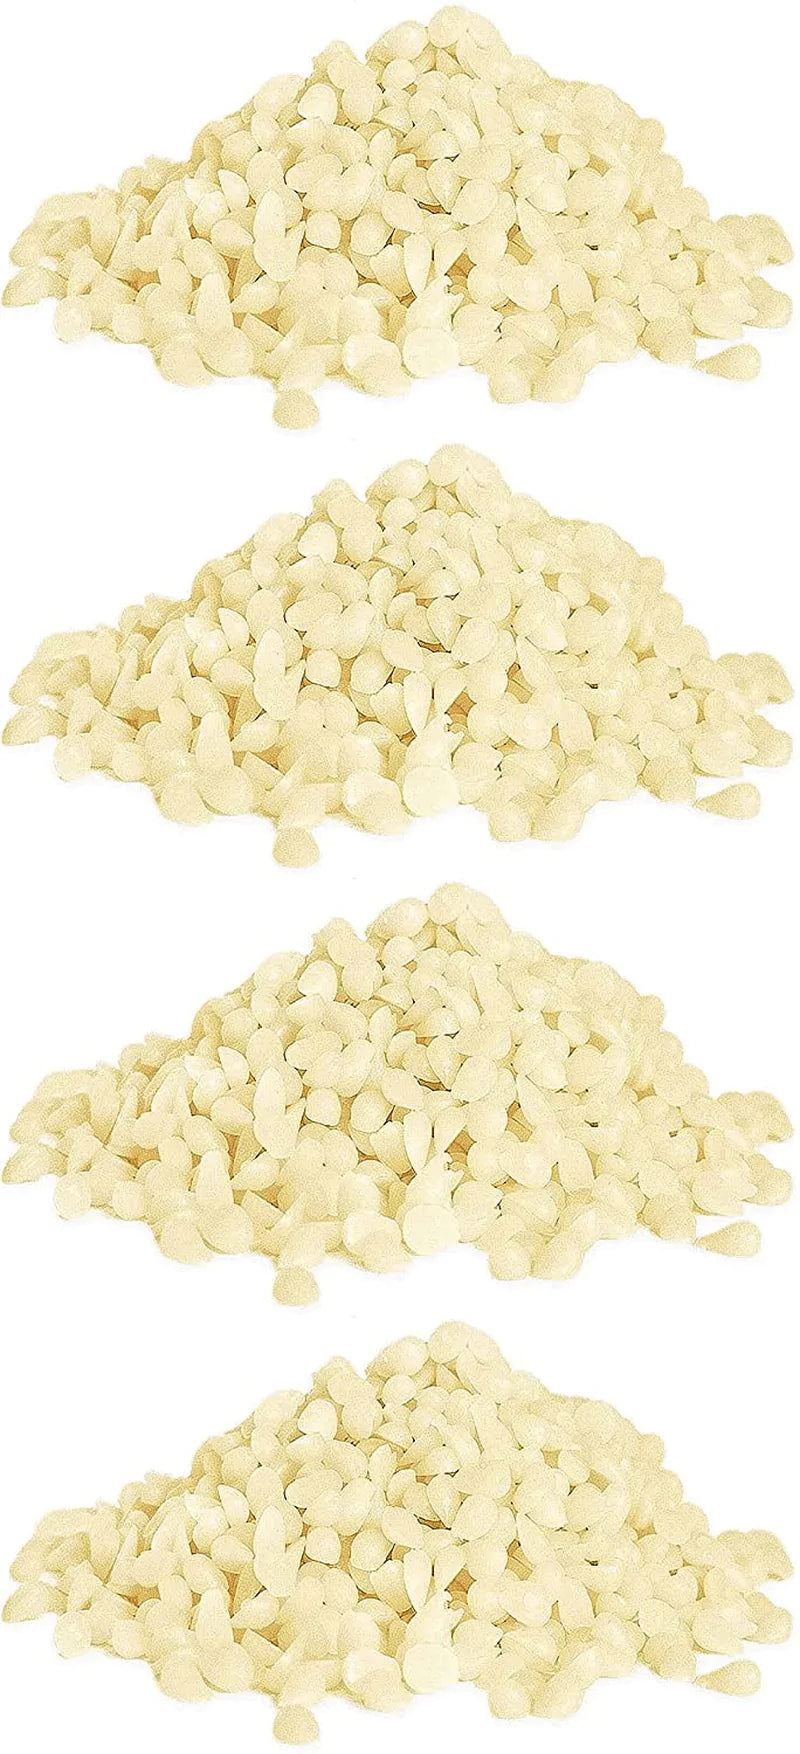 YIHANG White Beeswax Pellets 10 lb-(160 oz) (Four Pack)